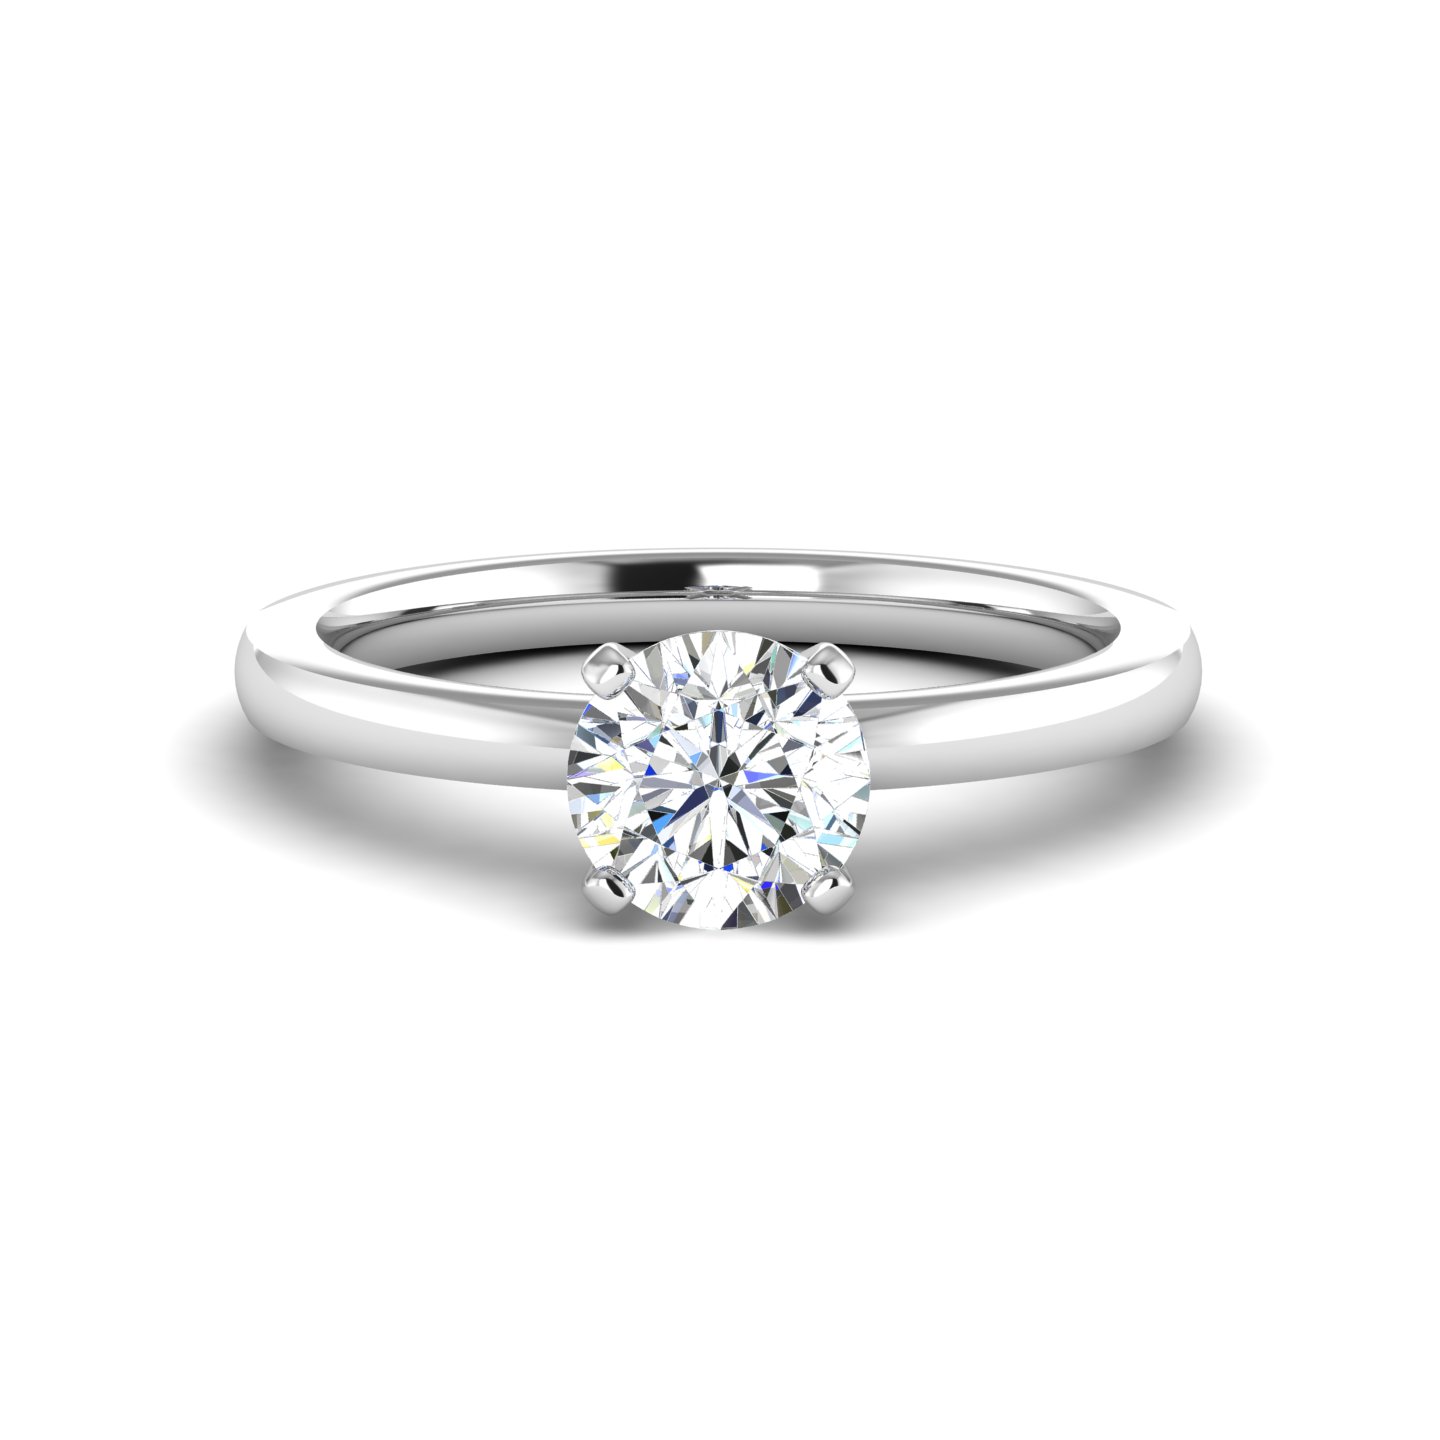 Tiffany Forever Wedding Band Ring in Platinum with a Diamond, 4 mm Wide |  Tiffany & Co.